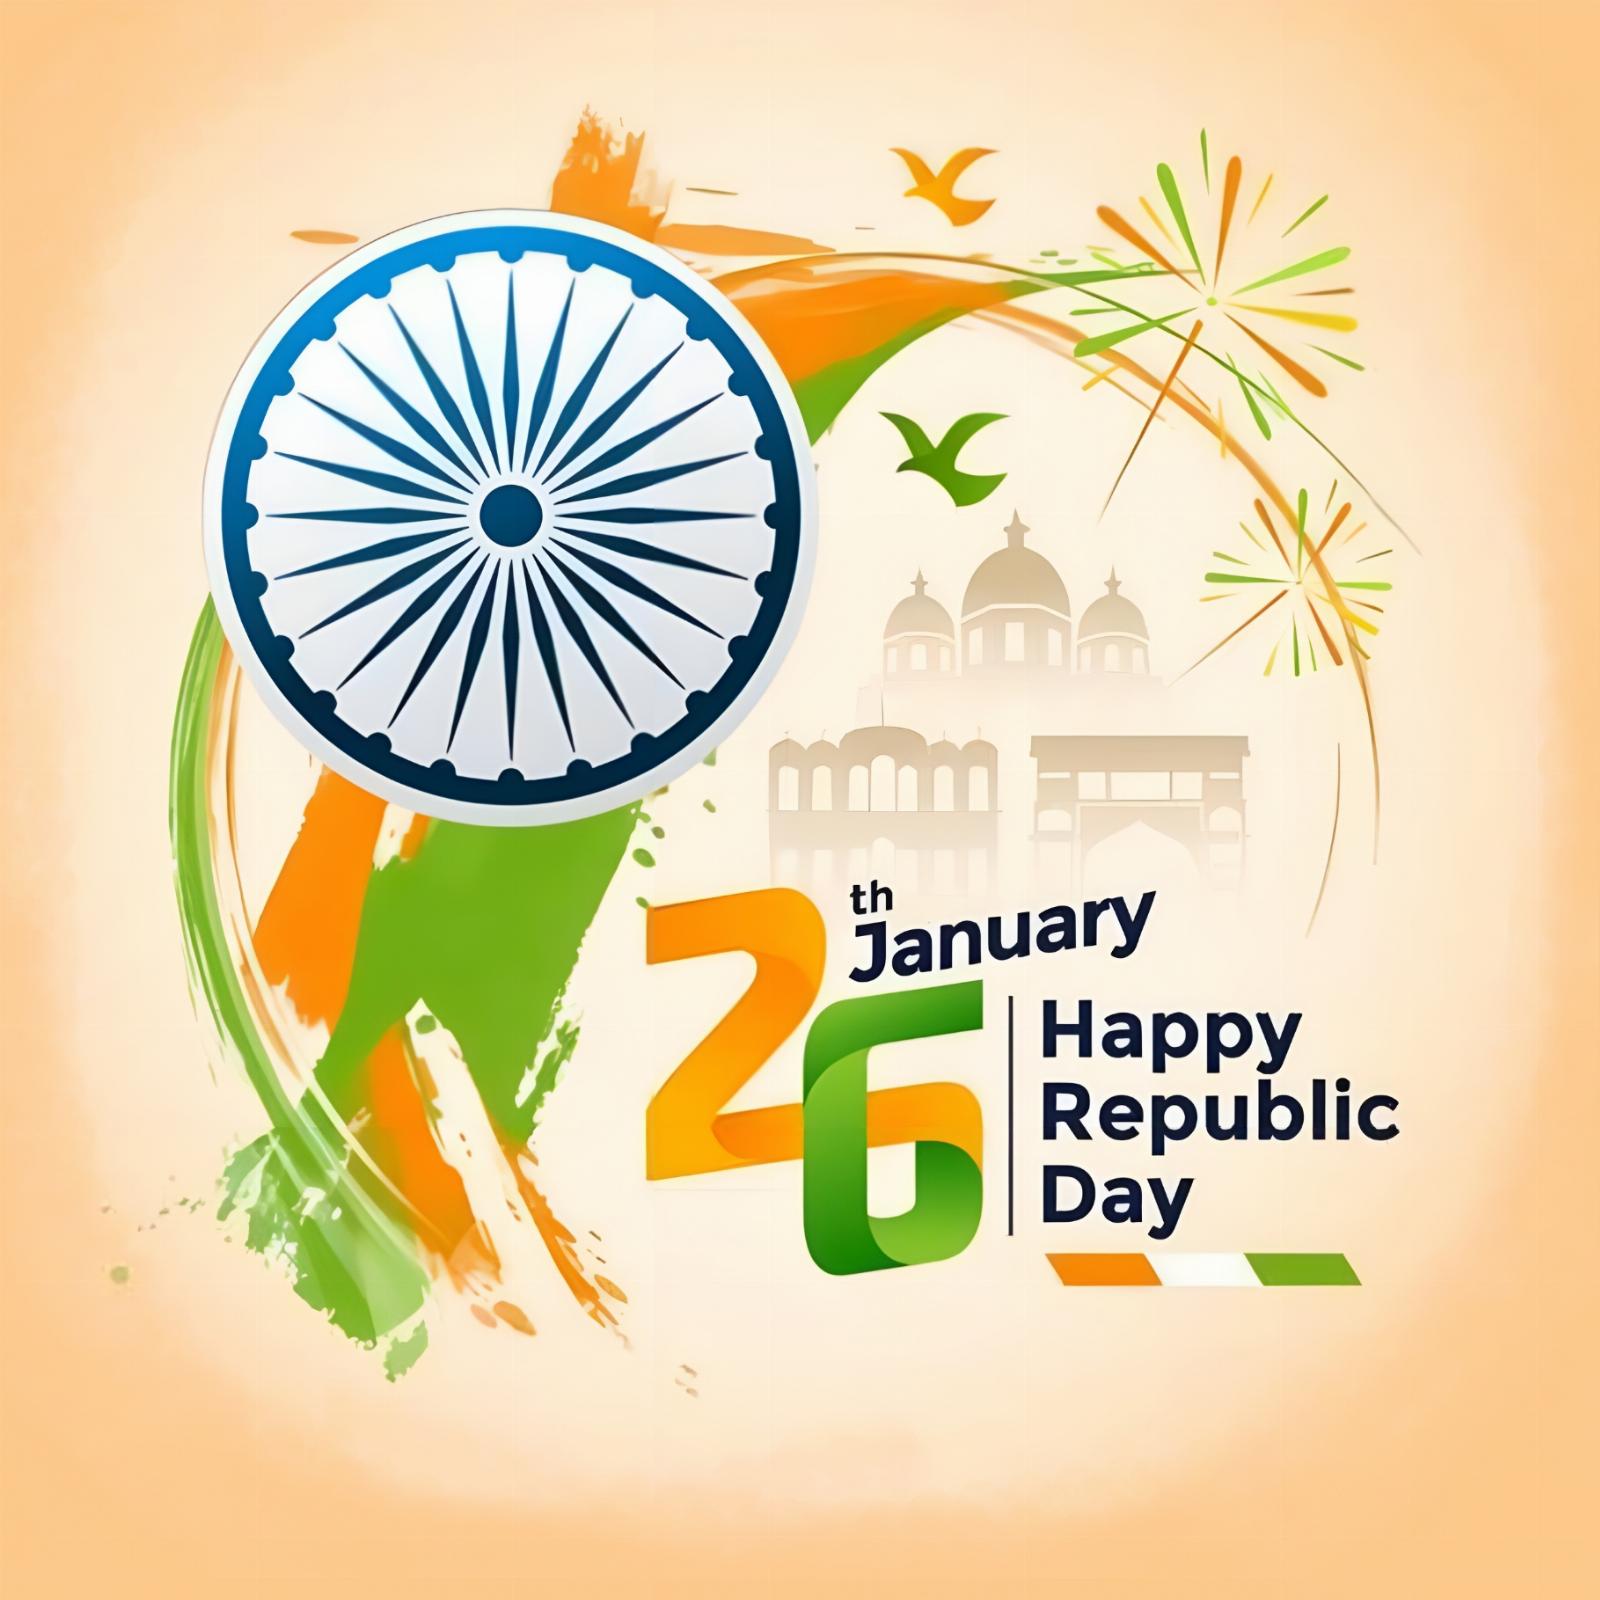 26 January Happy Republic Day Images